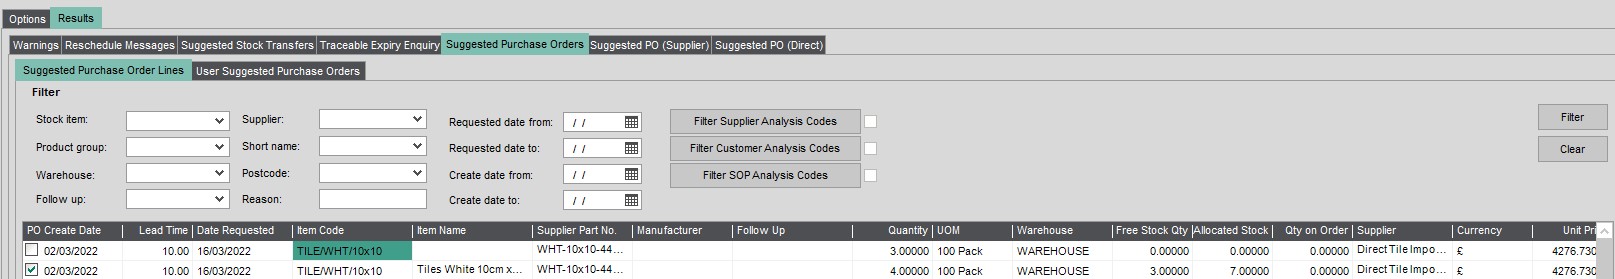 Sicon Distribution MRP - Section 1.2.5.6 mage 4